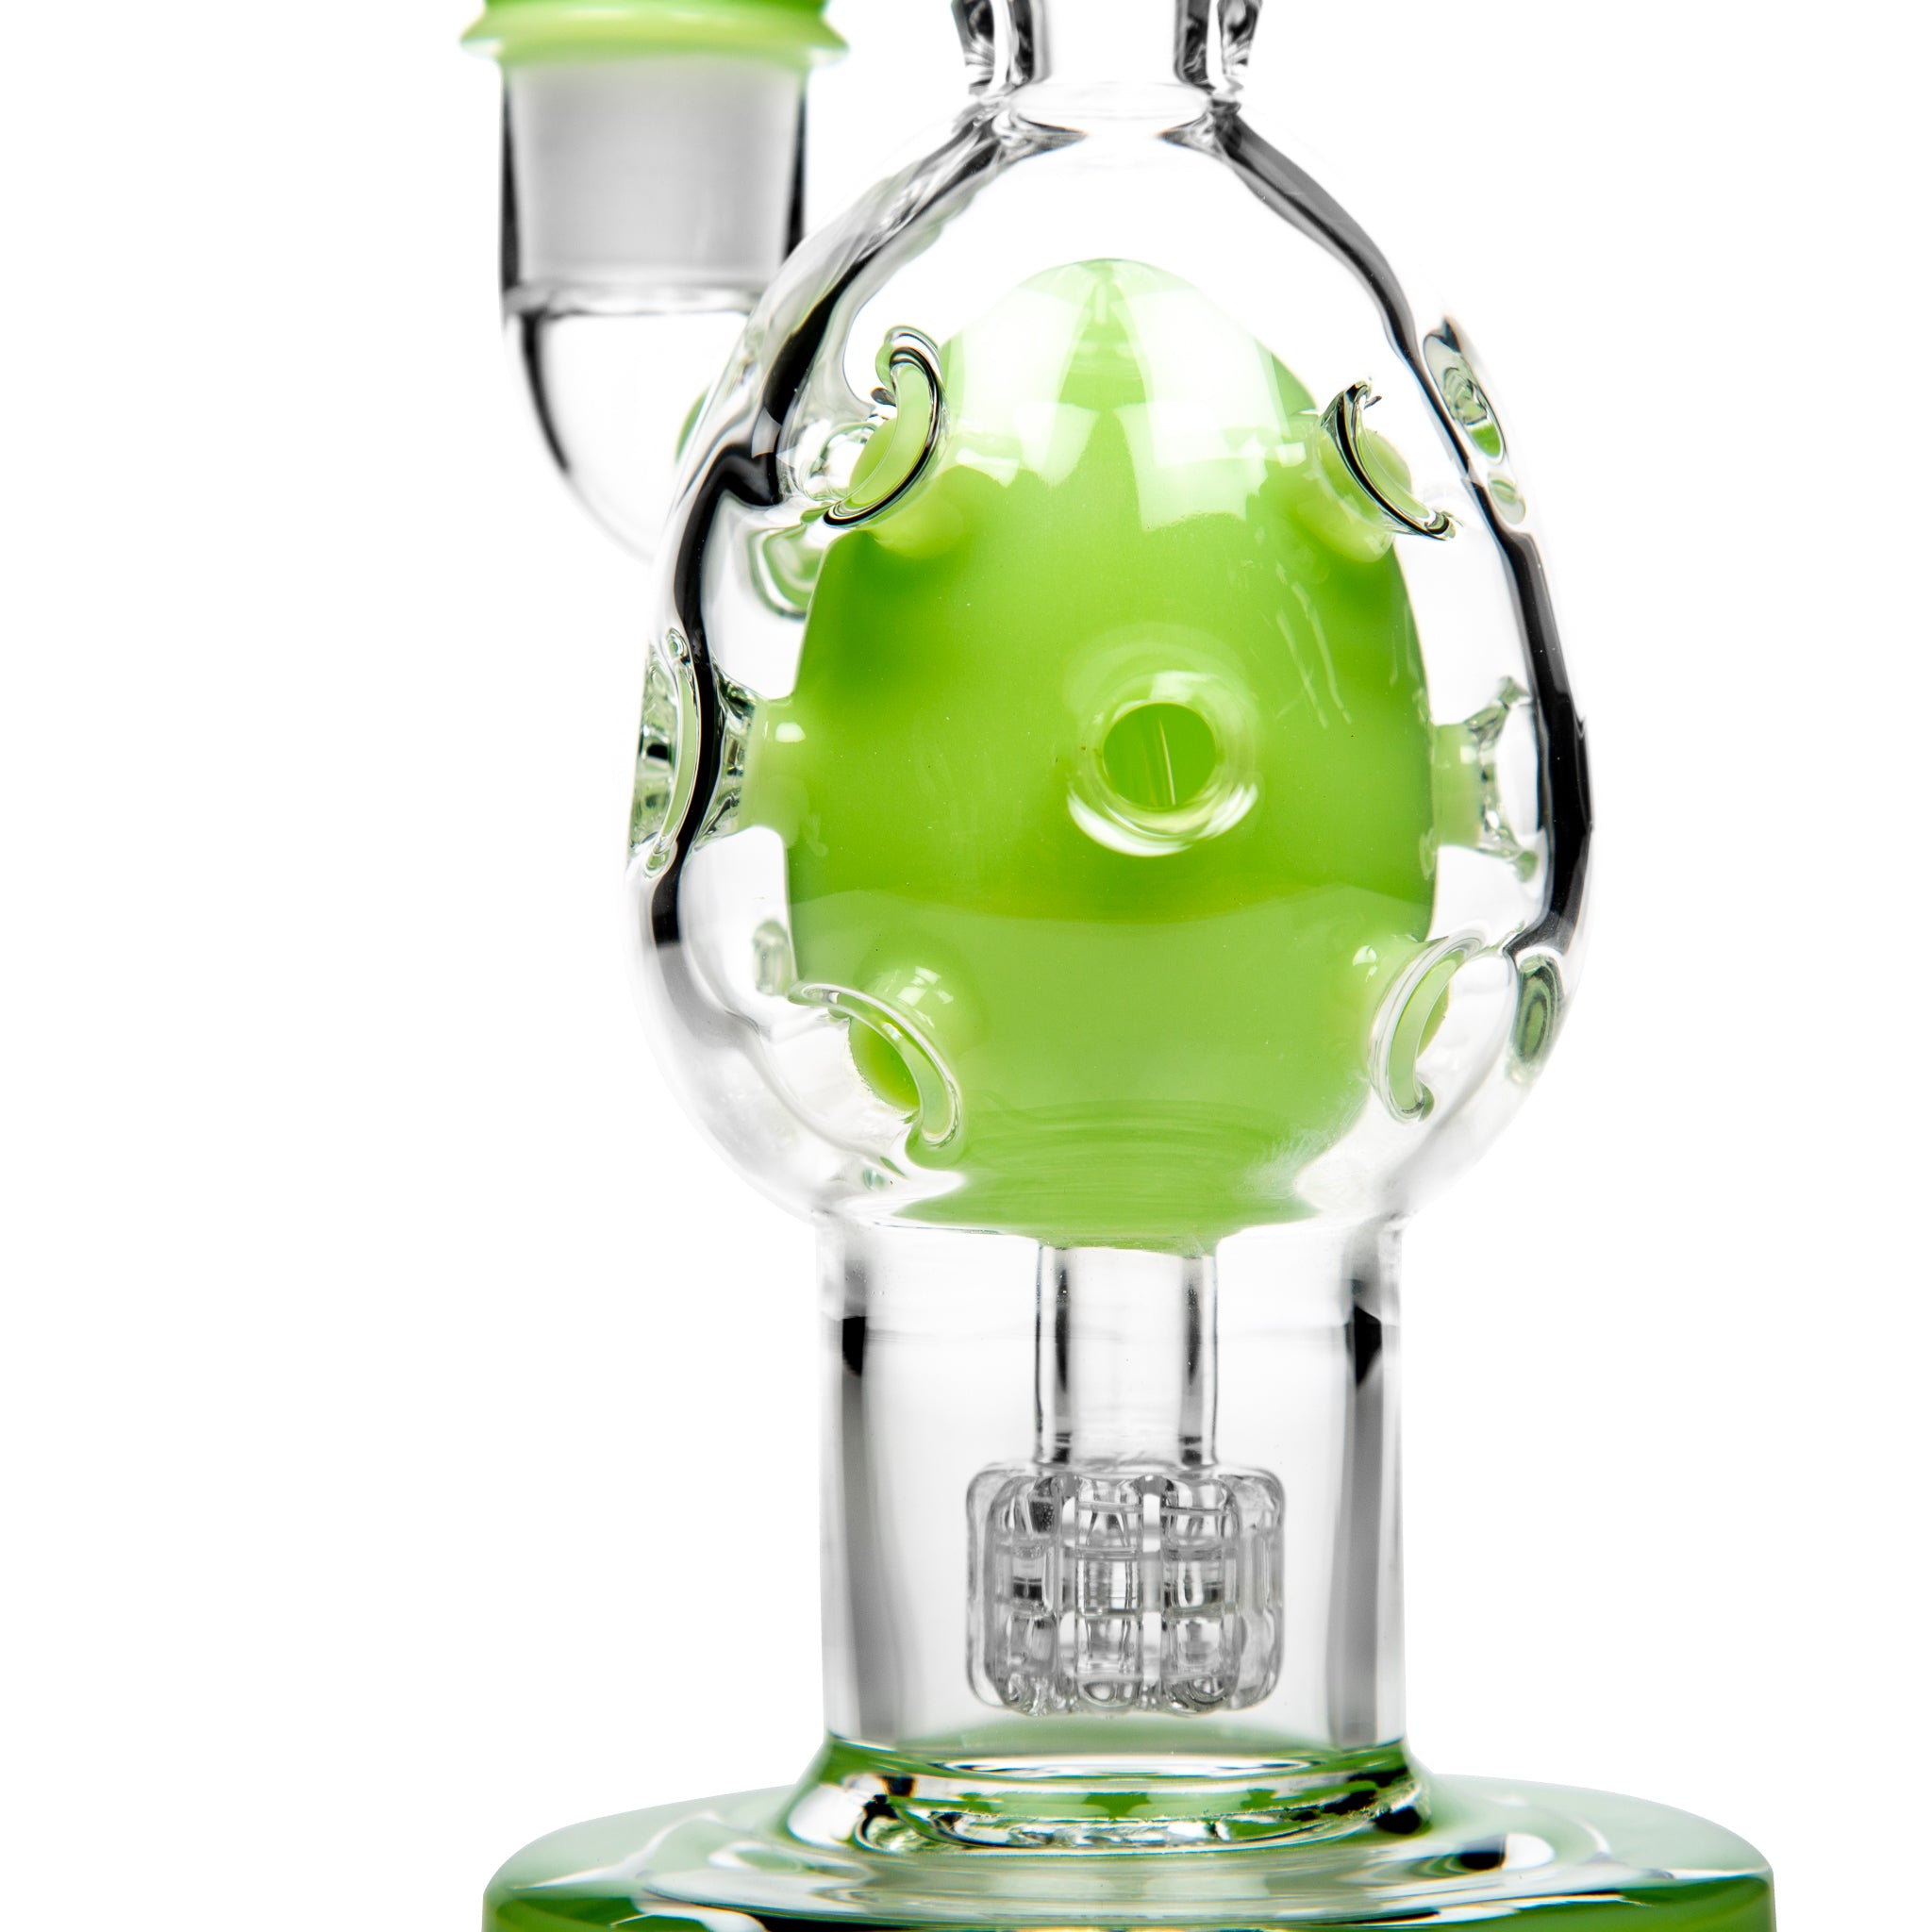 Fab egg style design of glass bong showing percolator to create a smooth draw.